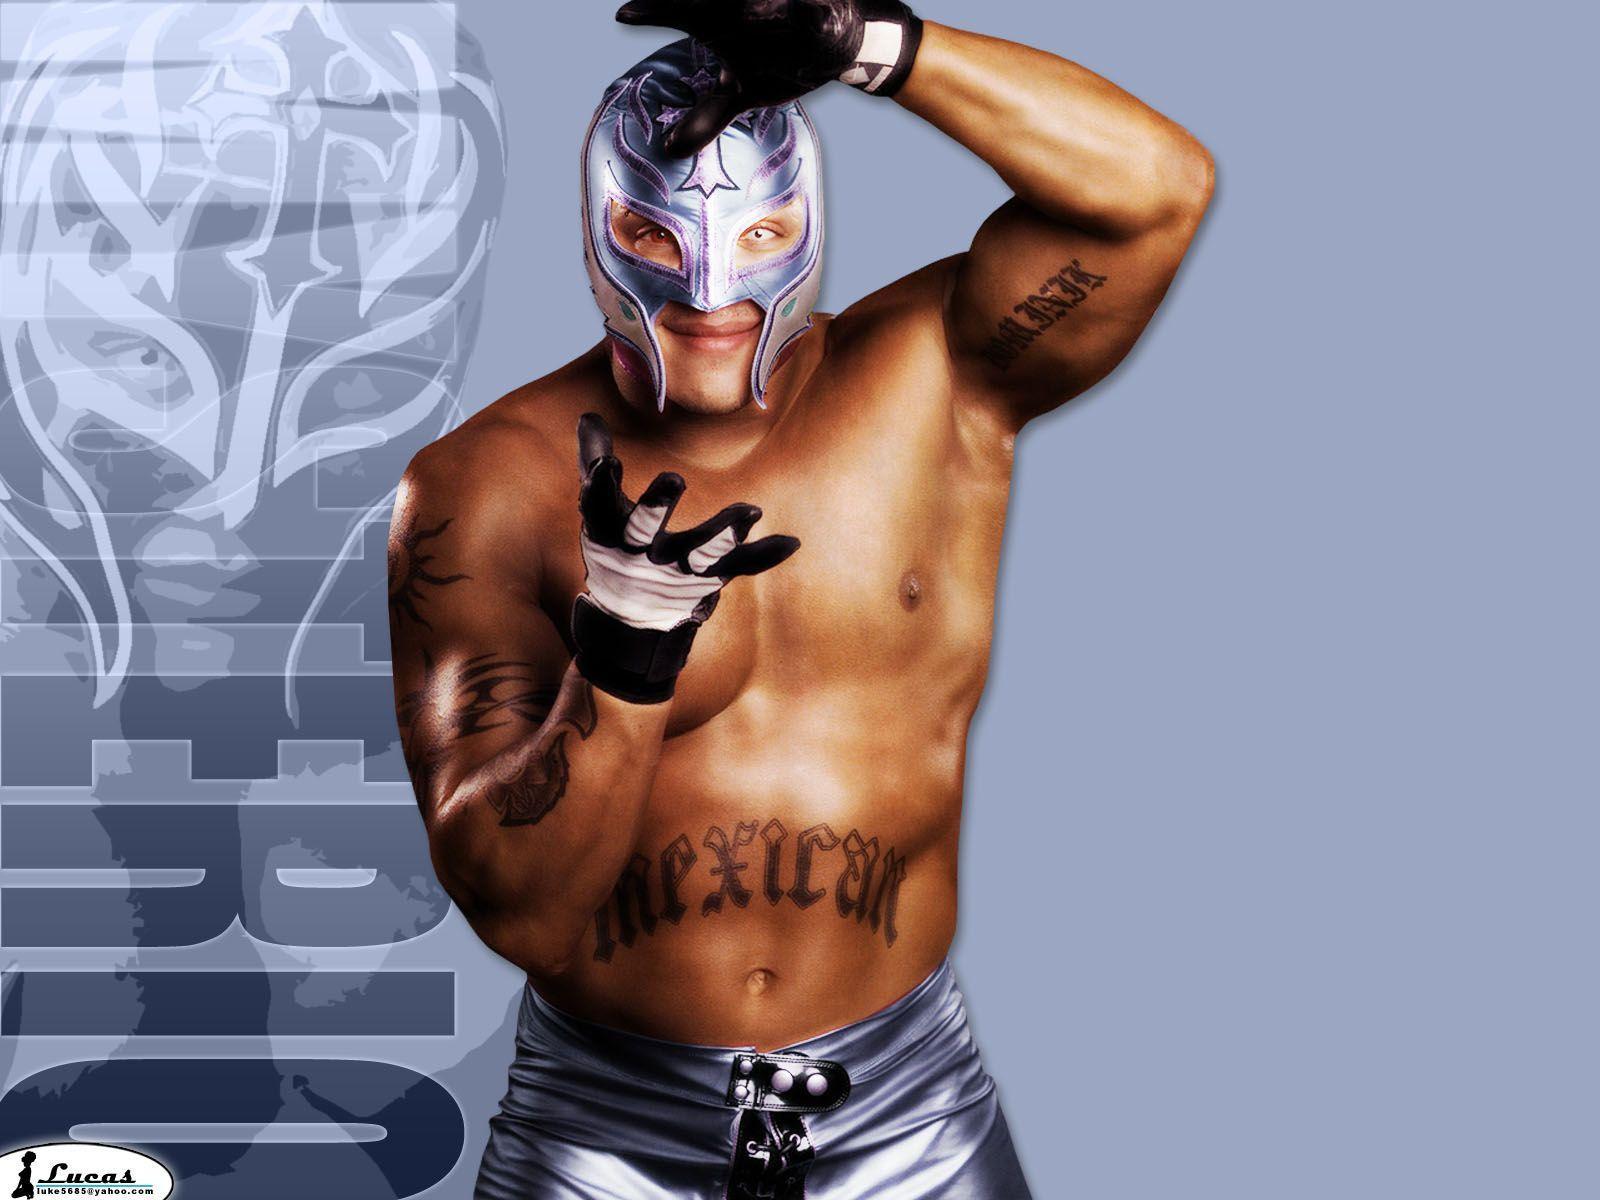 Rey Mysterio HD Wallpaper. All Kinds of Sports Wallpaper Collection